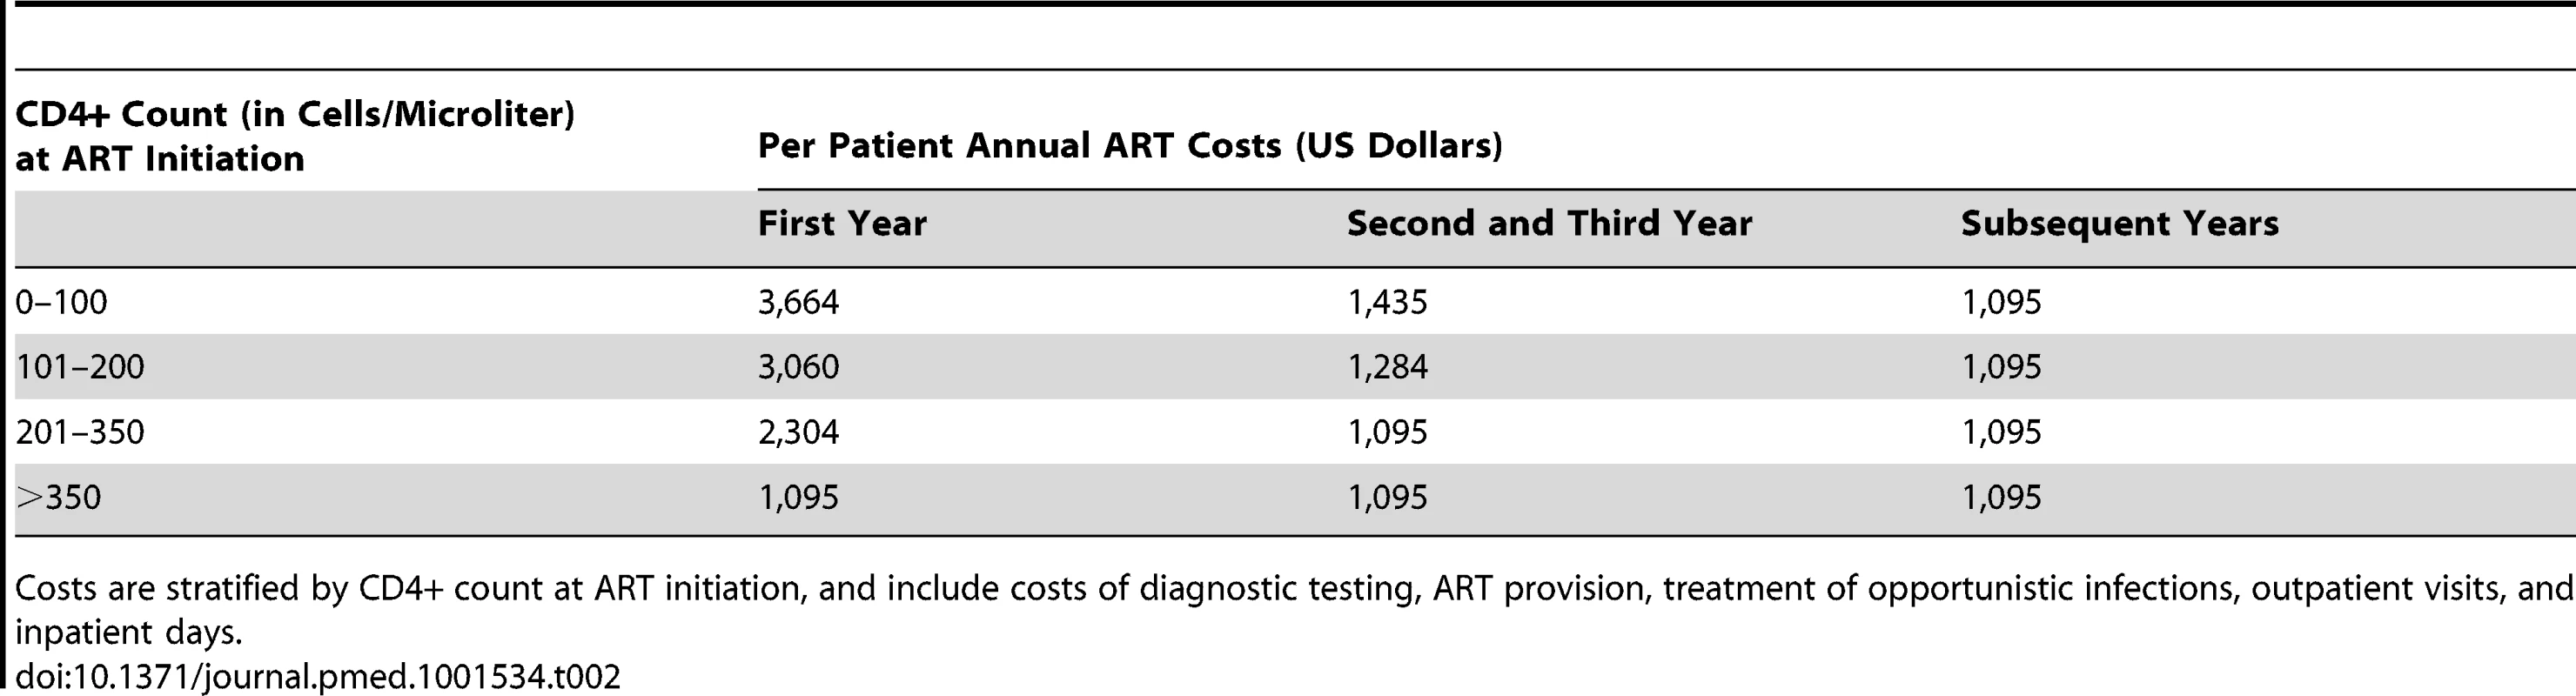 Cost input values used in this study.